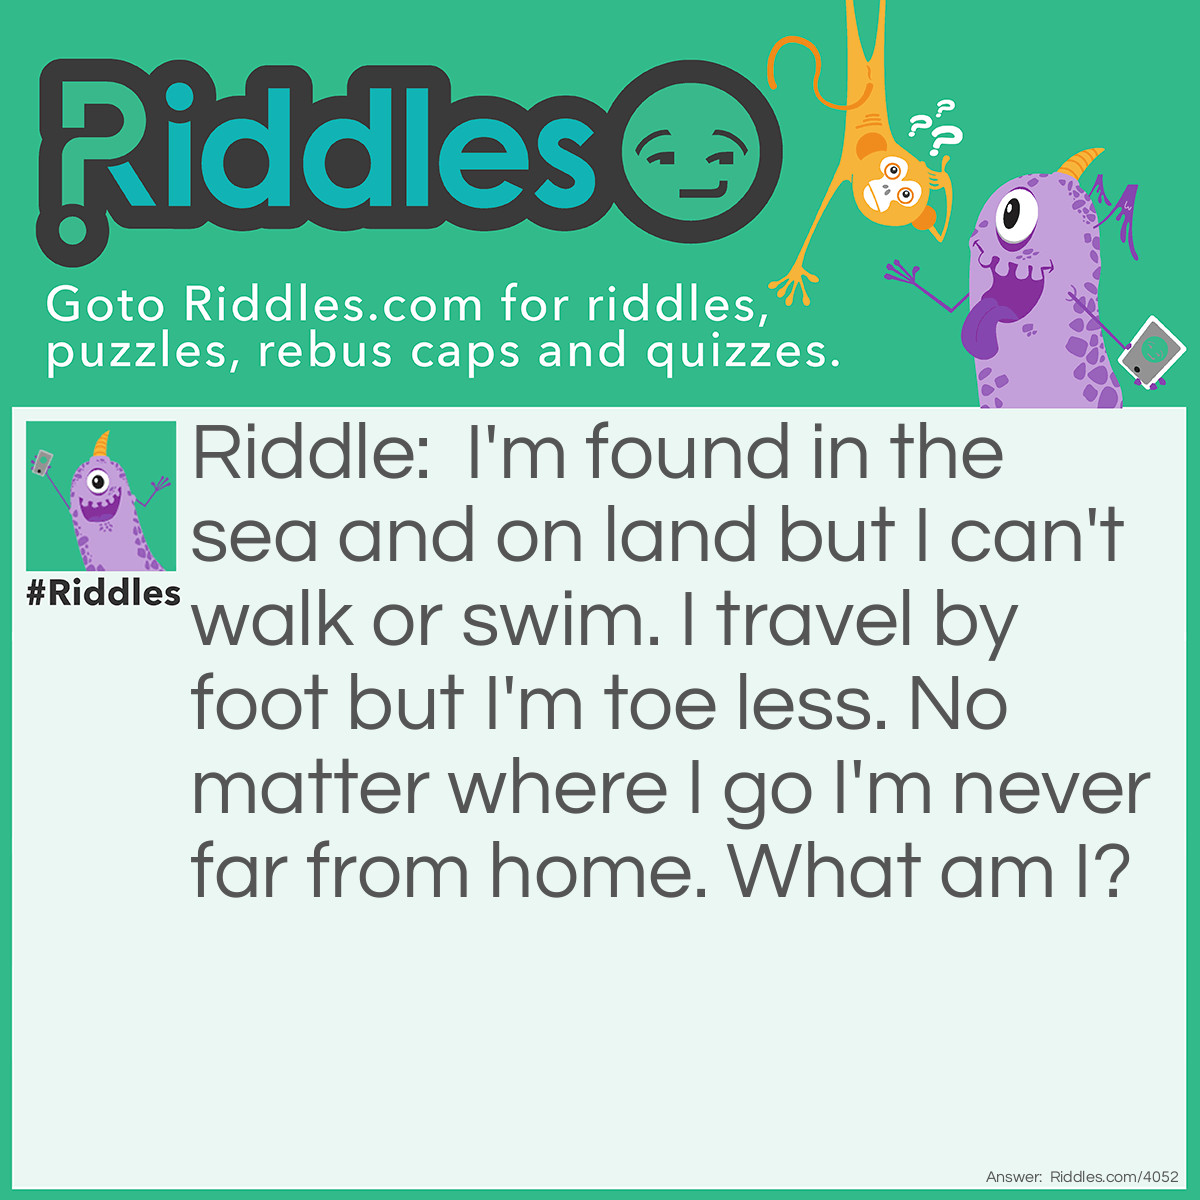 Riddle: I'm found in the sea and on land but I can't walk or swim. I travel by foot but I'm toe less. No matter where I go I'm never far from home. What am I? Answer: A snail.